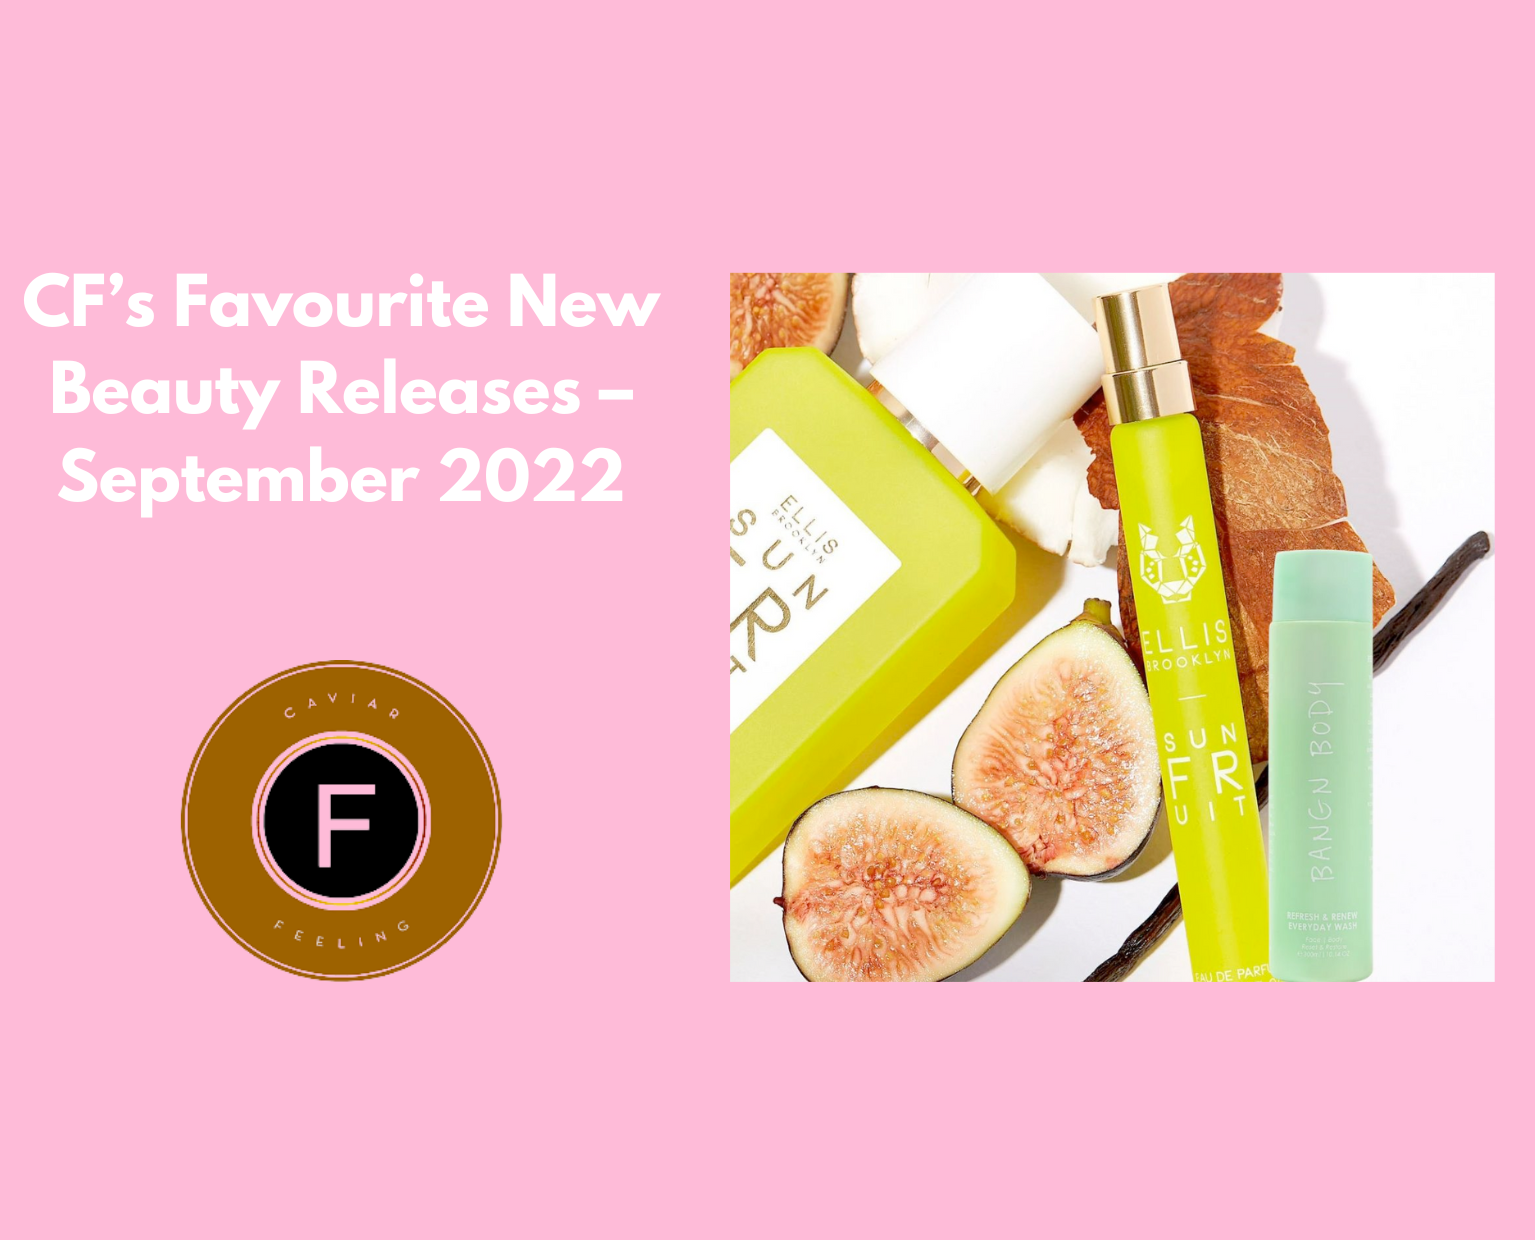 Best New Beauty Products to Try in April 2022: Skin, Makeup, Hair